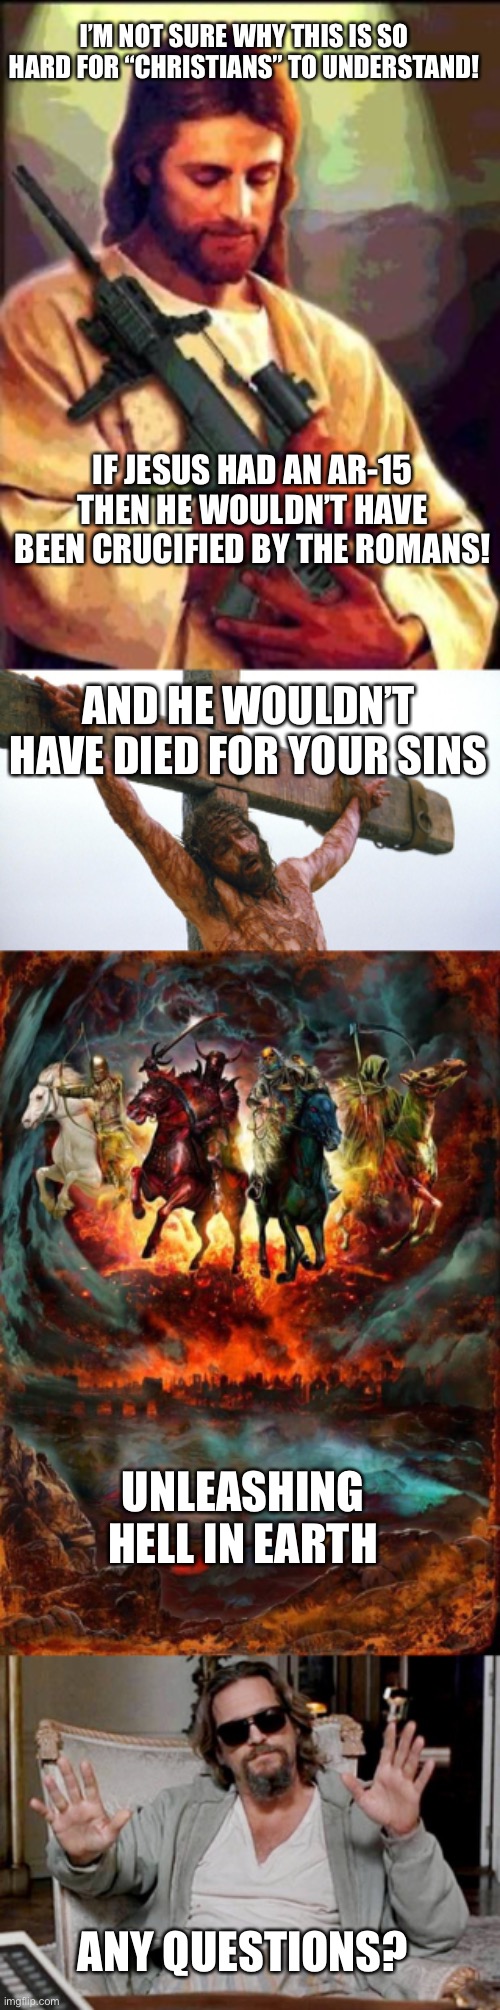 I’M NOT SURE WHY THIS IS SO HARD FOR “CHRISTIANS” TO UNDERSTAND! IF JESUS HAD AN AR-15 THEN HE WOULDN’T HAVE BEEN CRUCIFIED BY THE ROMANS! AND HE WOULDN’T HAVE DIED FOR YOUR SINS; UNLEASHING HELL IN EARTH; ANY QUESTIONS? | image tagged in jesus ar-15,jesus crucified,the four horsemen of the apocalypse,i got this | made w/ Imgflip meme maker